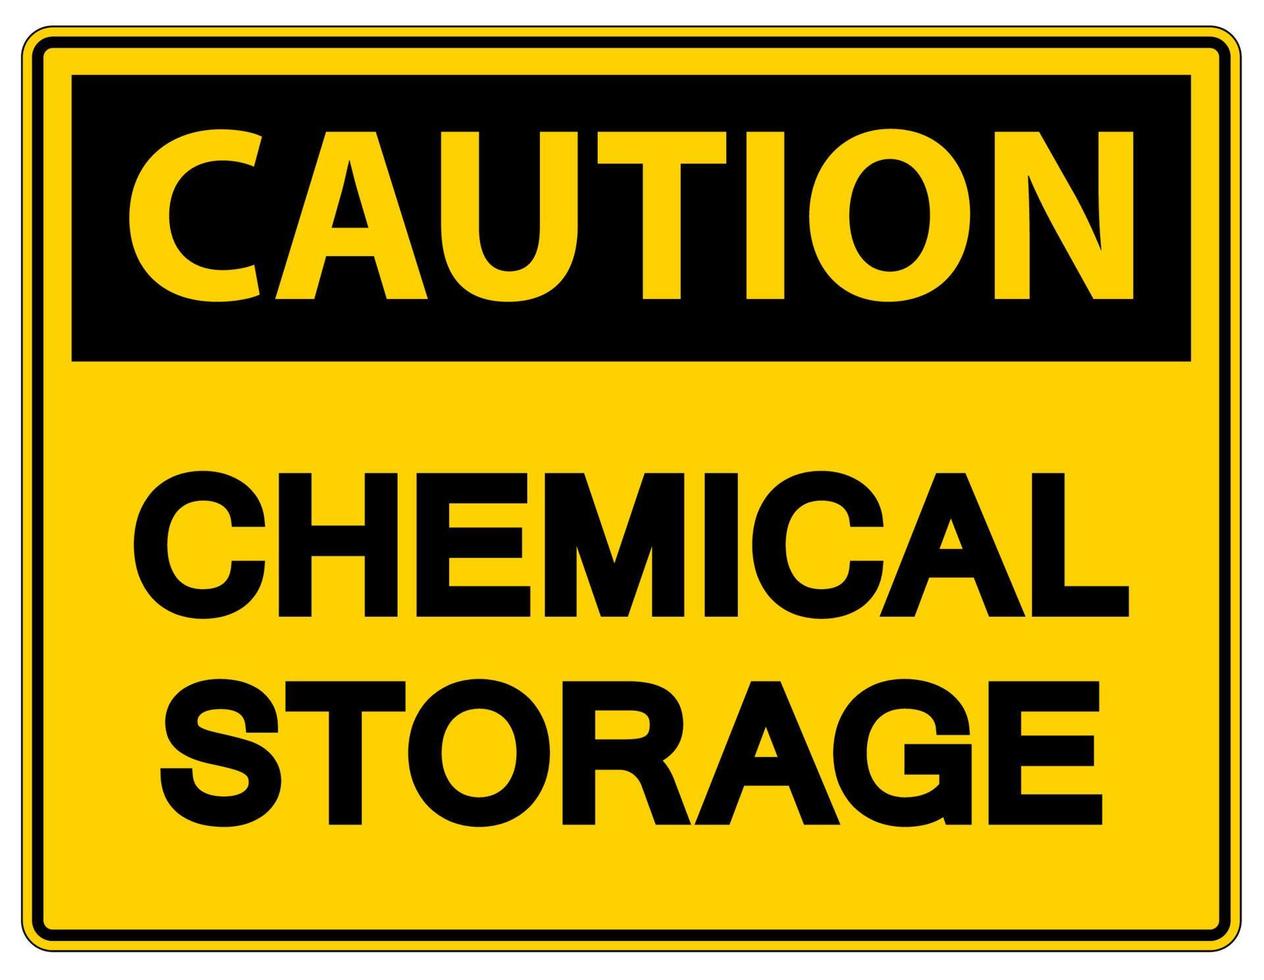 Caution Chemical Storage Sign On White Background vector